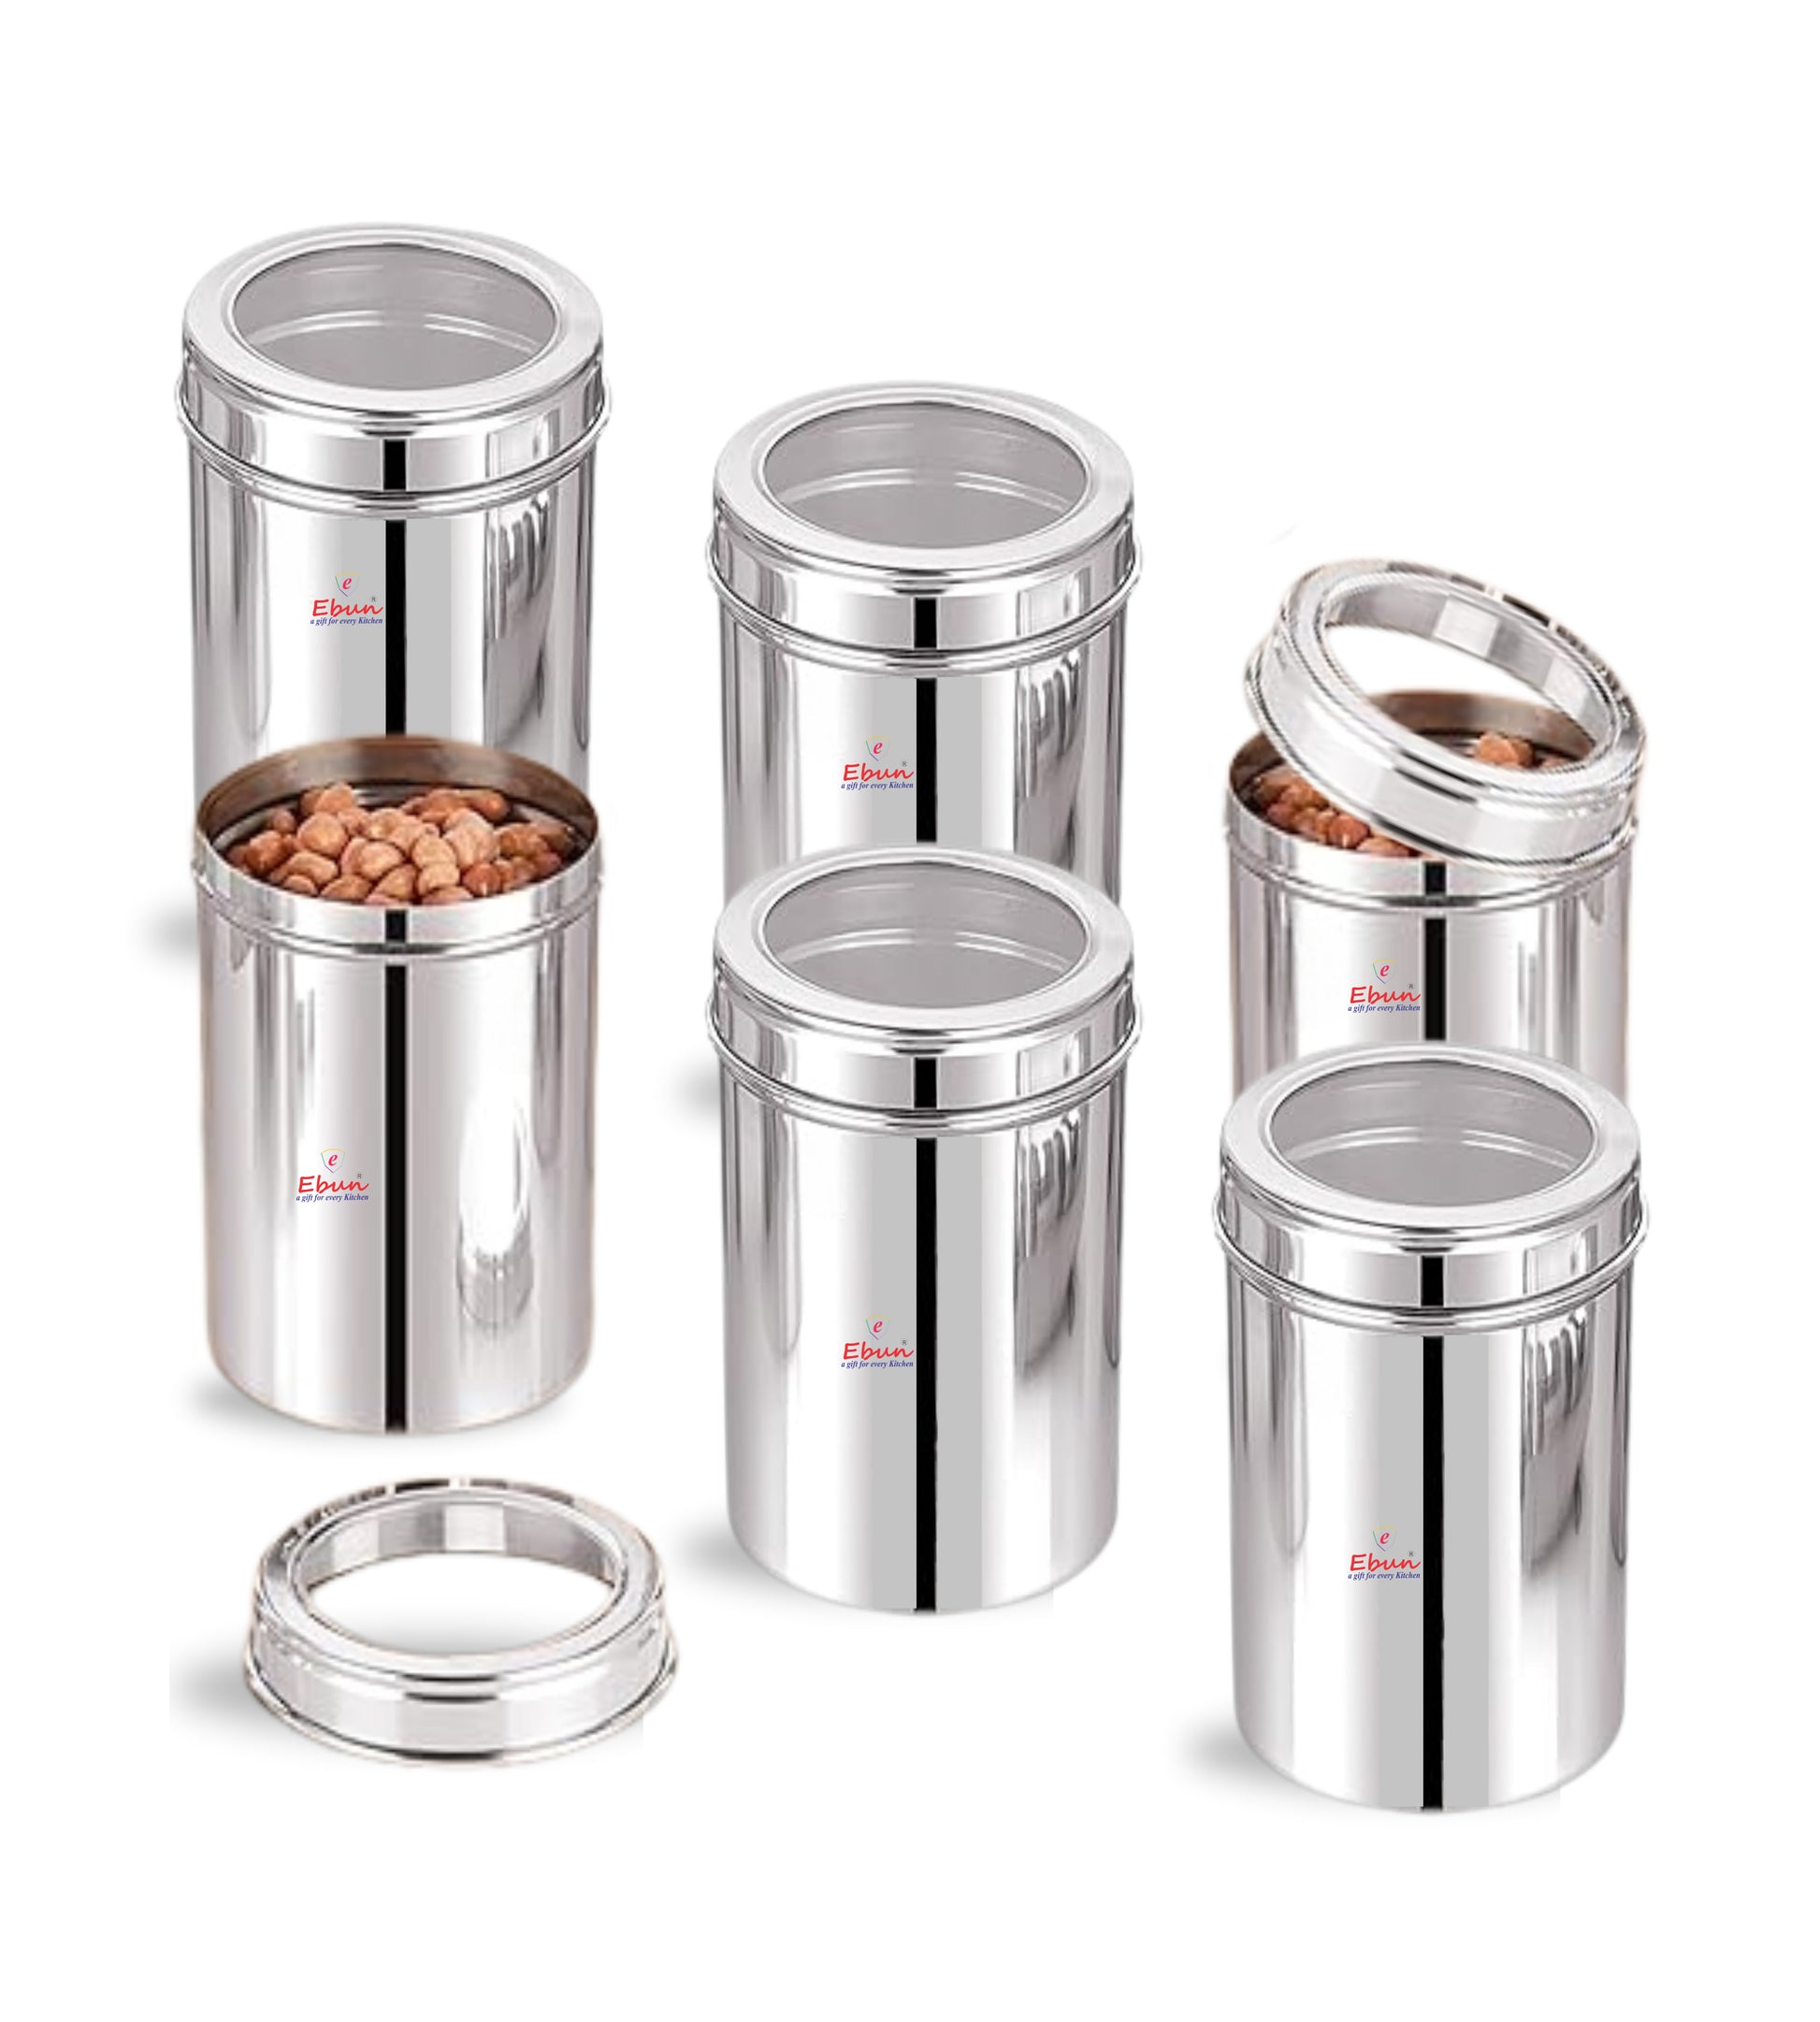 stainless steel containers for kitchen | stainless steel containers | steel storage containers for kitchen | steel container | steel container with lid | kitchen containers set steel | steel container for kitchen storage set | steel containers | stainless steel storage containers |  stainless steel containers with lid | kitchen steel containers set | stainless steel container | steel airtight container | steel storage containers